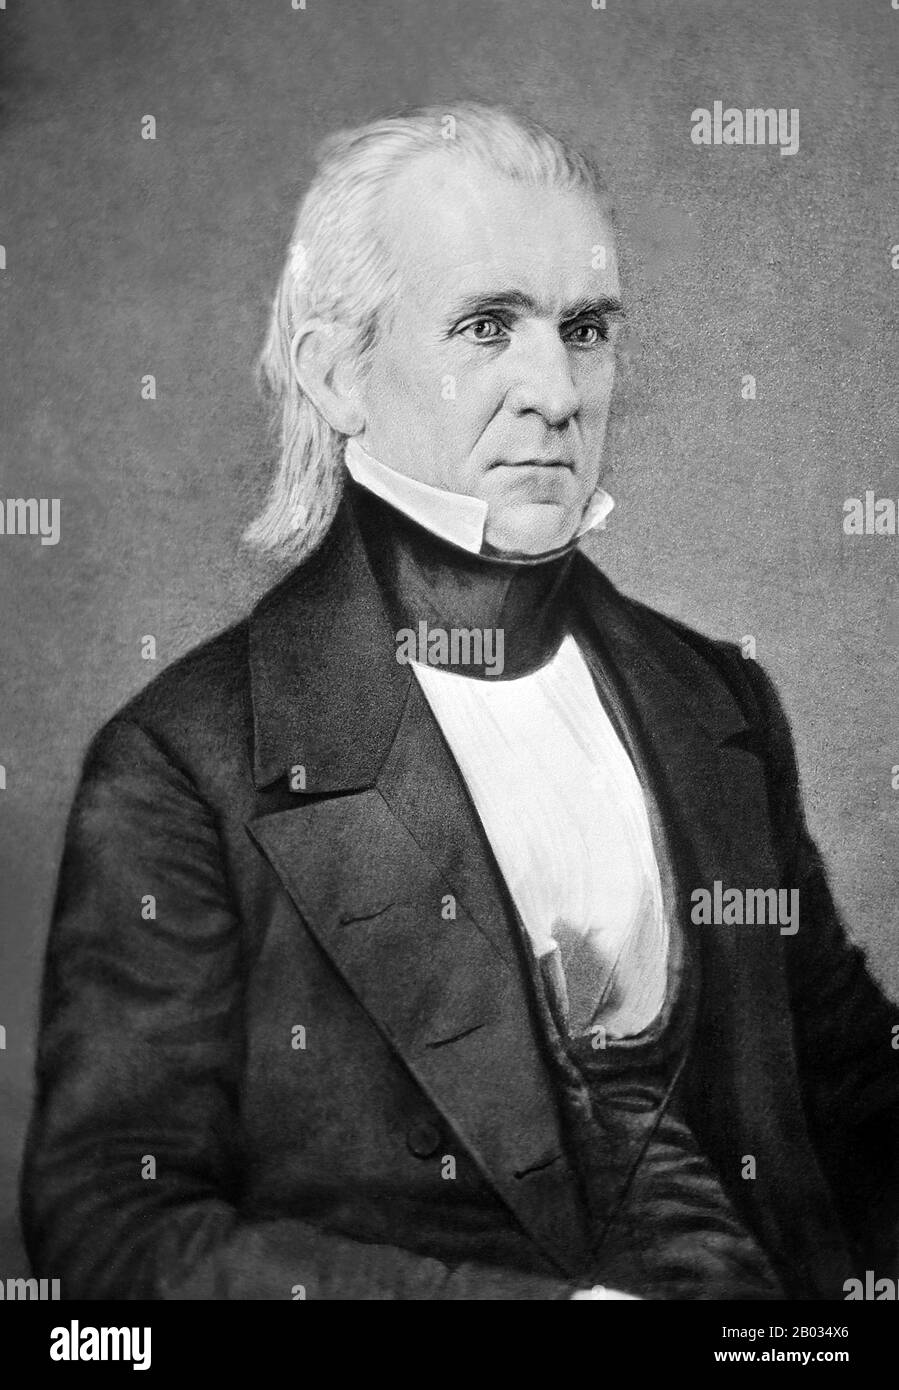 James Knox Polk (November 2, 1795 – June 15, 1849) was the 11th President of the United States (1845–49). Polk was born in Mecklenburg County, North Carolina. He later lived in and represented Tennessee. A Democrat, Polk served as the 13th Speaker of the House of Representatives (1835–39)—the only president to have served as House Speaker—and Governor of Tennessee (1839–41).  Polk was the surprise (dark horse) candidate for president in 1844, defeating Henry Clay of the rival Whig Party by promising to annex the Republic of Texas. Polk was a leader of Jacksonian Democracy during the Second Par Stock Photo